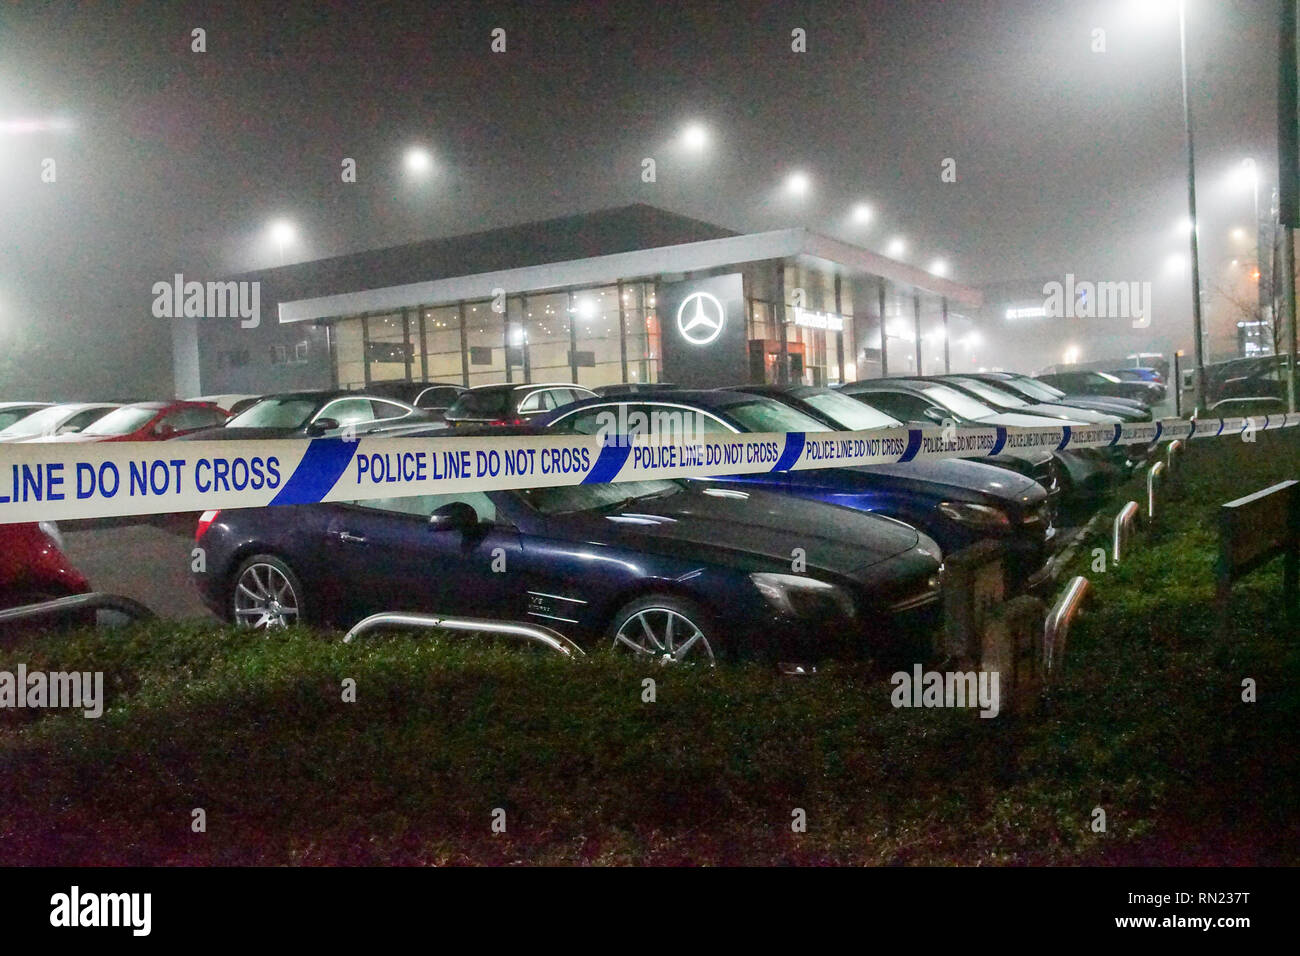 Kent, UK. 16th Feb 2019. Police were tonight investigating following a reported a stabbing in Tonbridge at the Mercedes Benz dealer in the town, Forensic teams were seen to be collecting evidence until late in the evening. Credit: Duncan Penfold/Alamy Live News Stock Photo